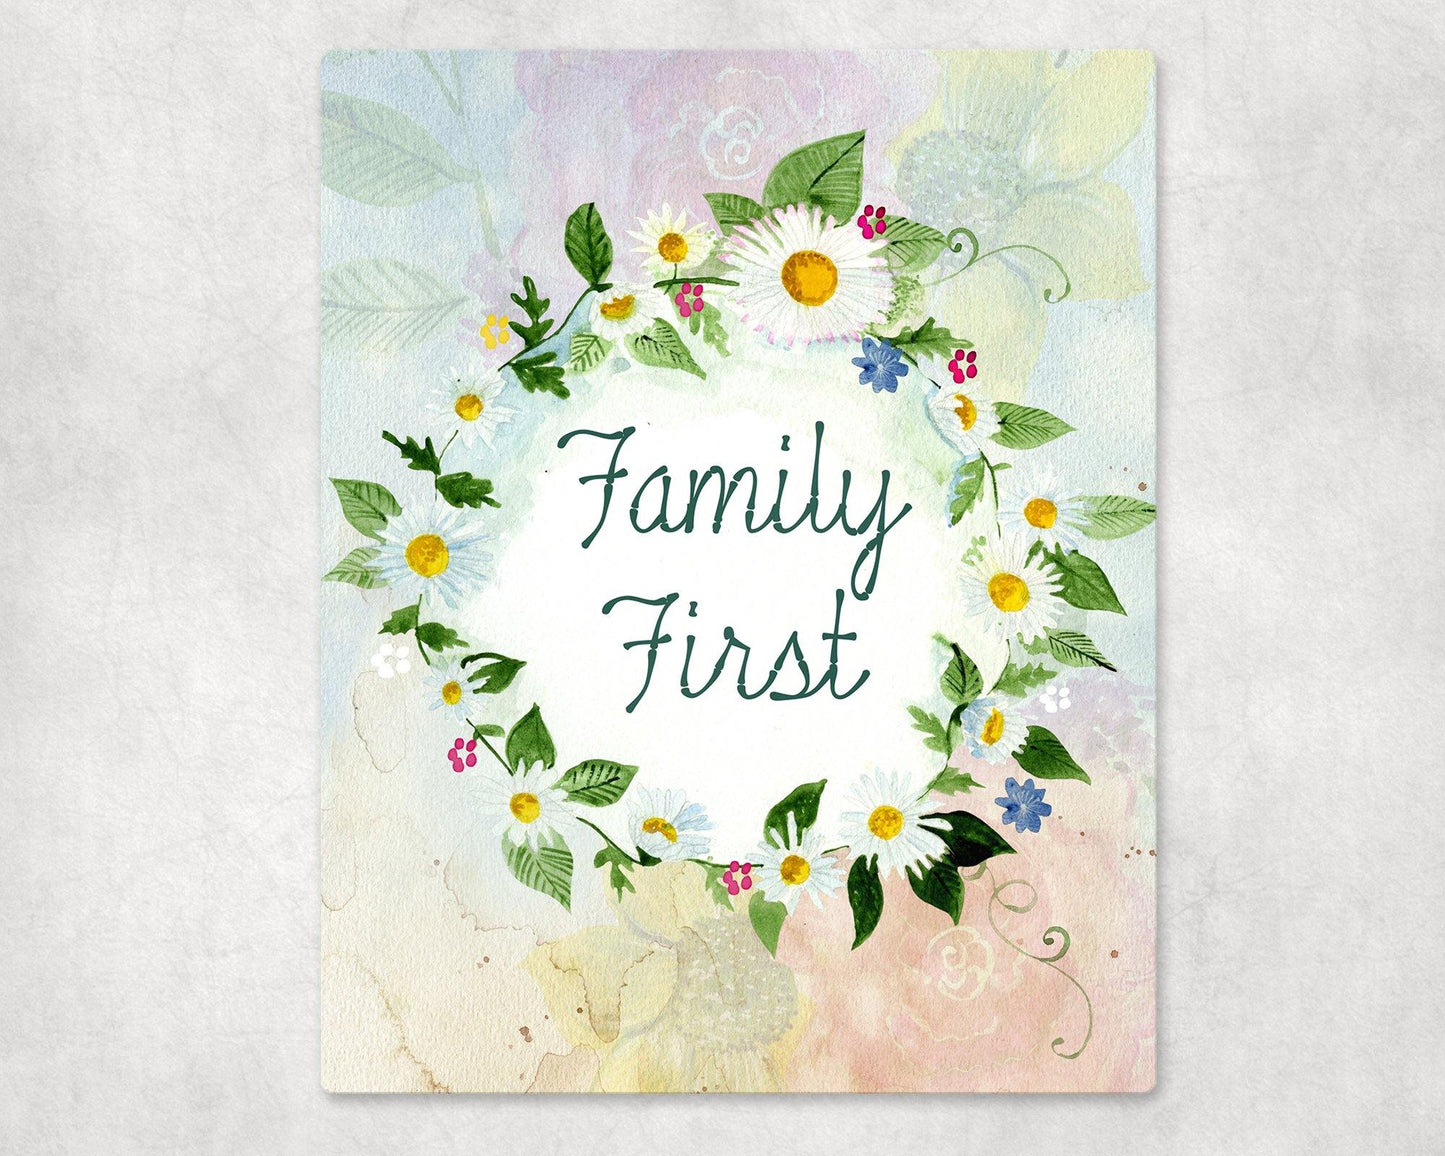 Family First Flower Wreath Metal Photo Panel - 8x10 - Schoppix Gifts